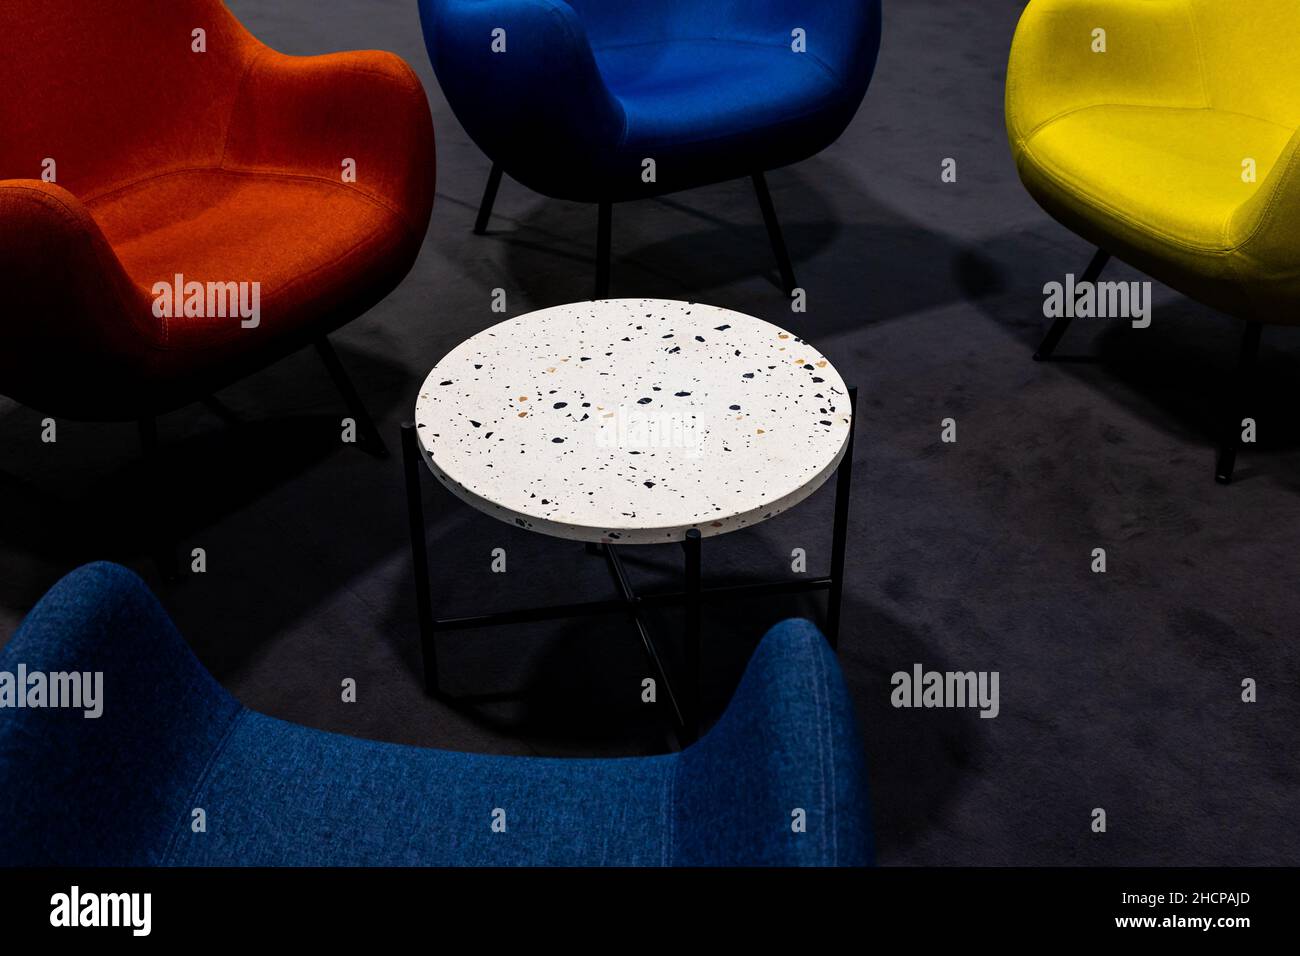 An empty meeting place during a pandemic. Colorful office chairs at the meeting place. lack of people. A place lit by atmospheric, artificial light. Stock Photo